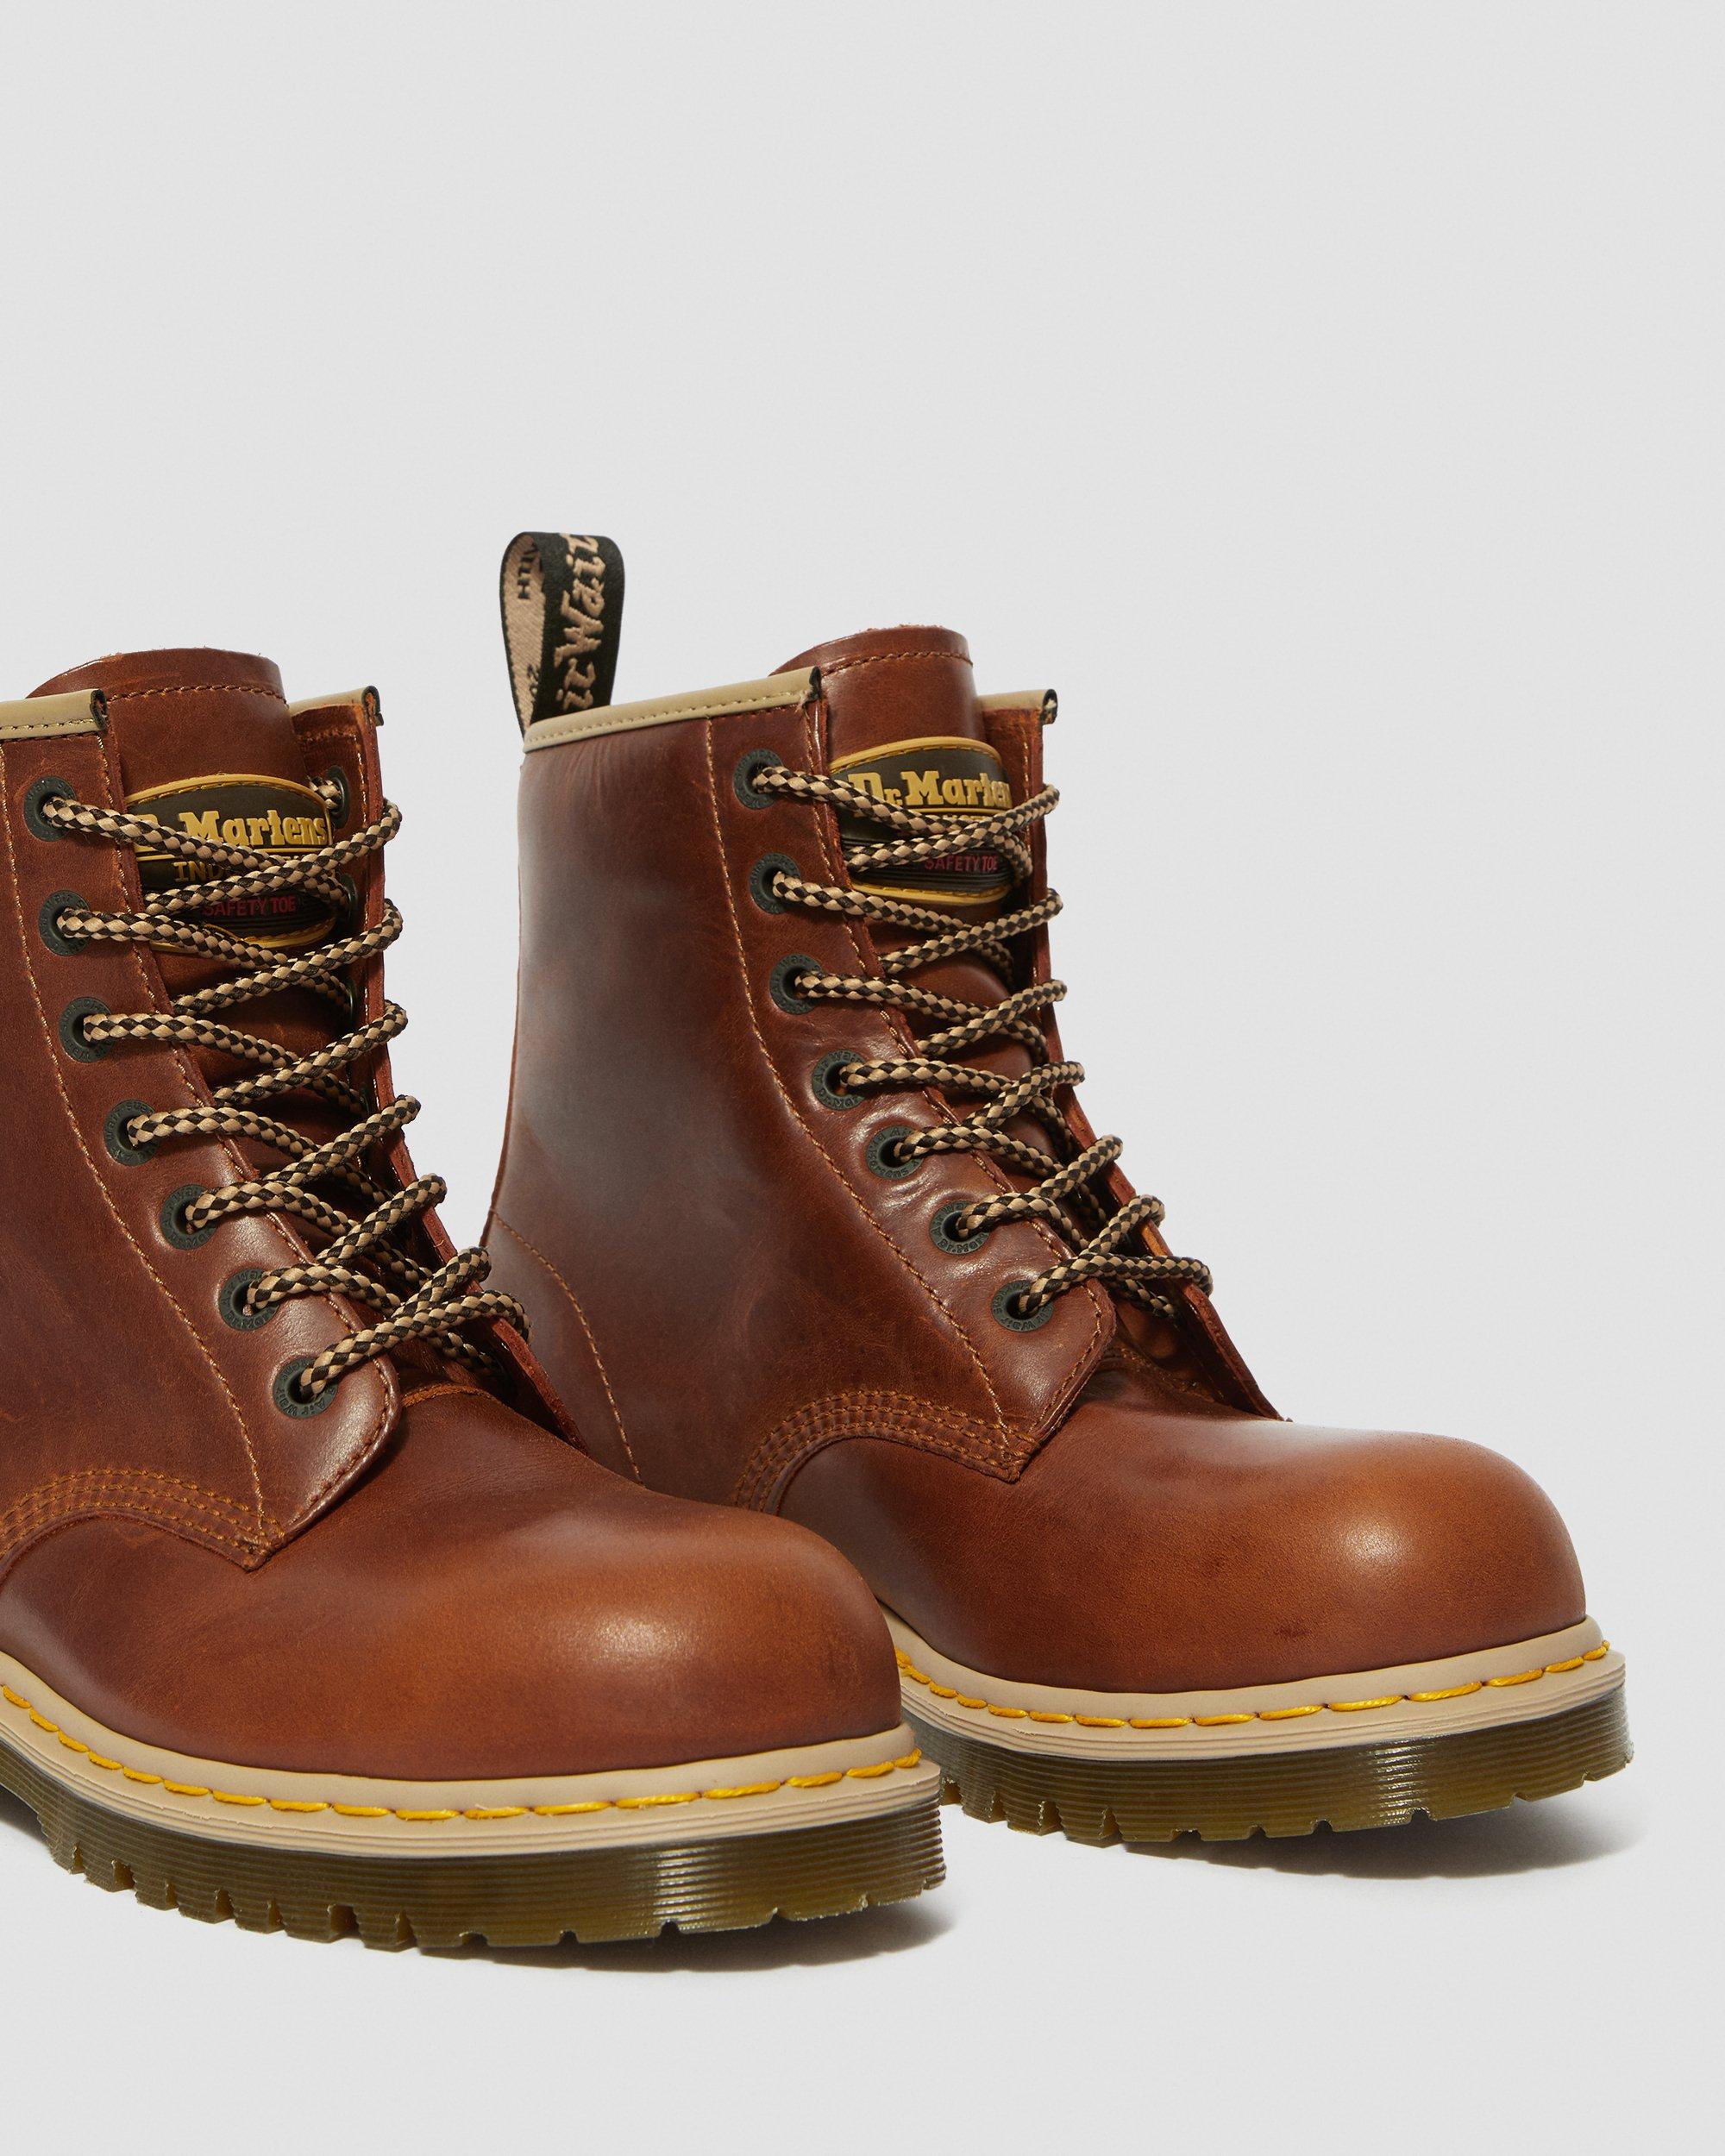 ICON 7B10 STEEL TOE WORK BOOTS | Dr 